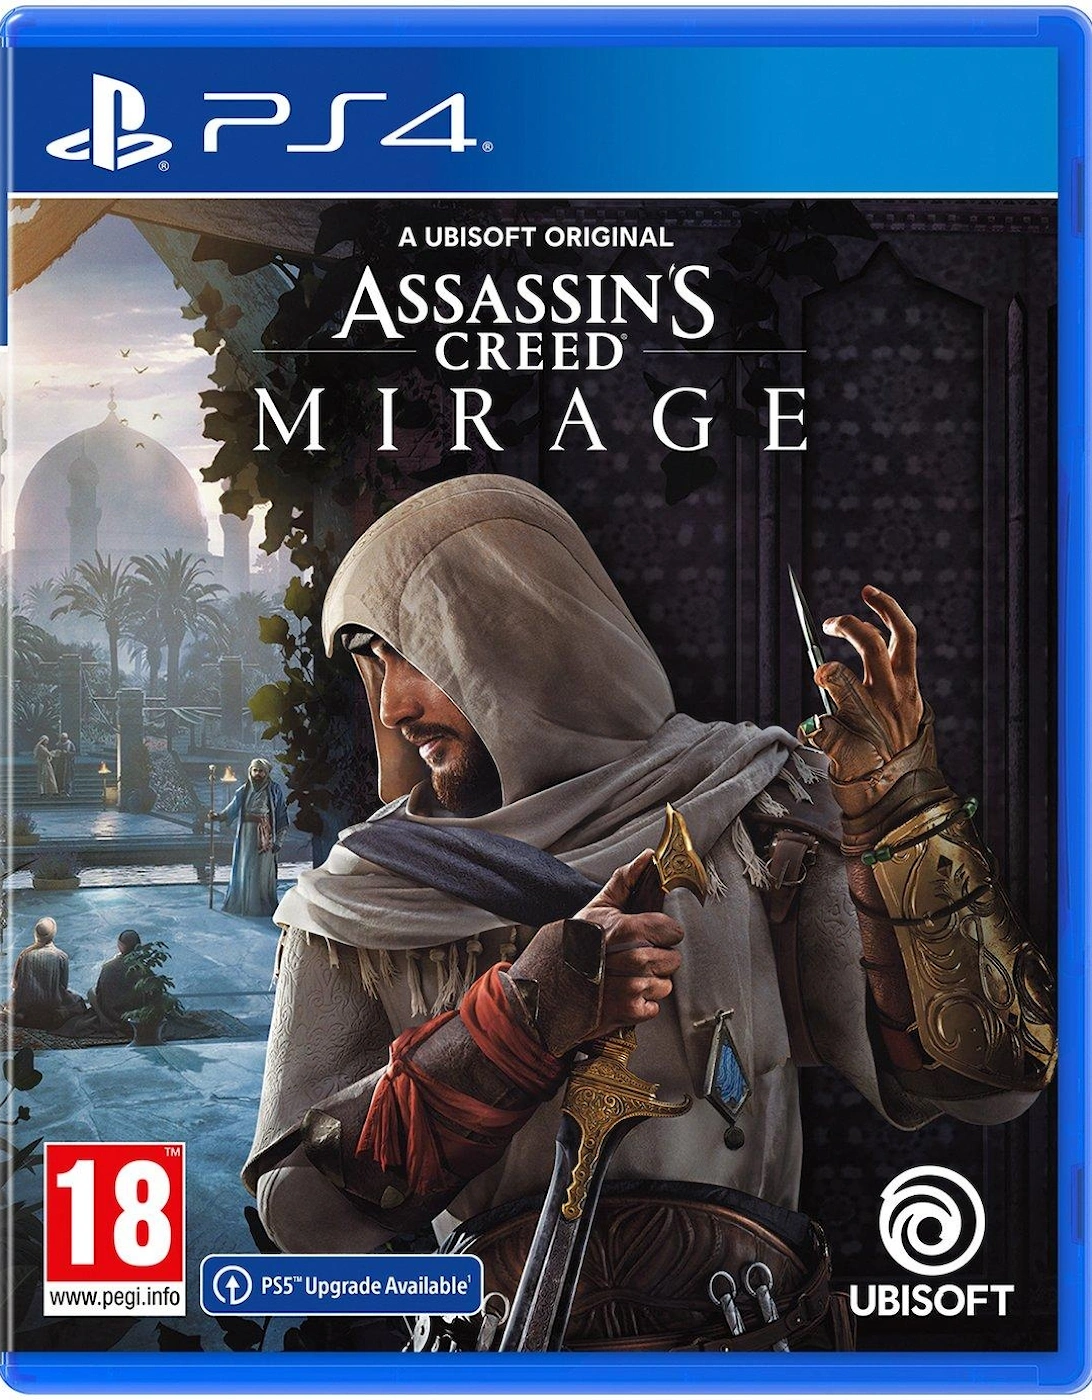 Assassin's Creed Mirage, 3 of 2